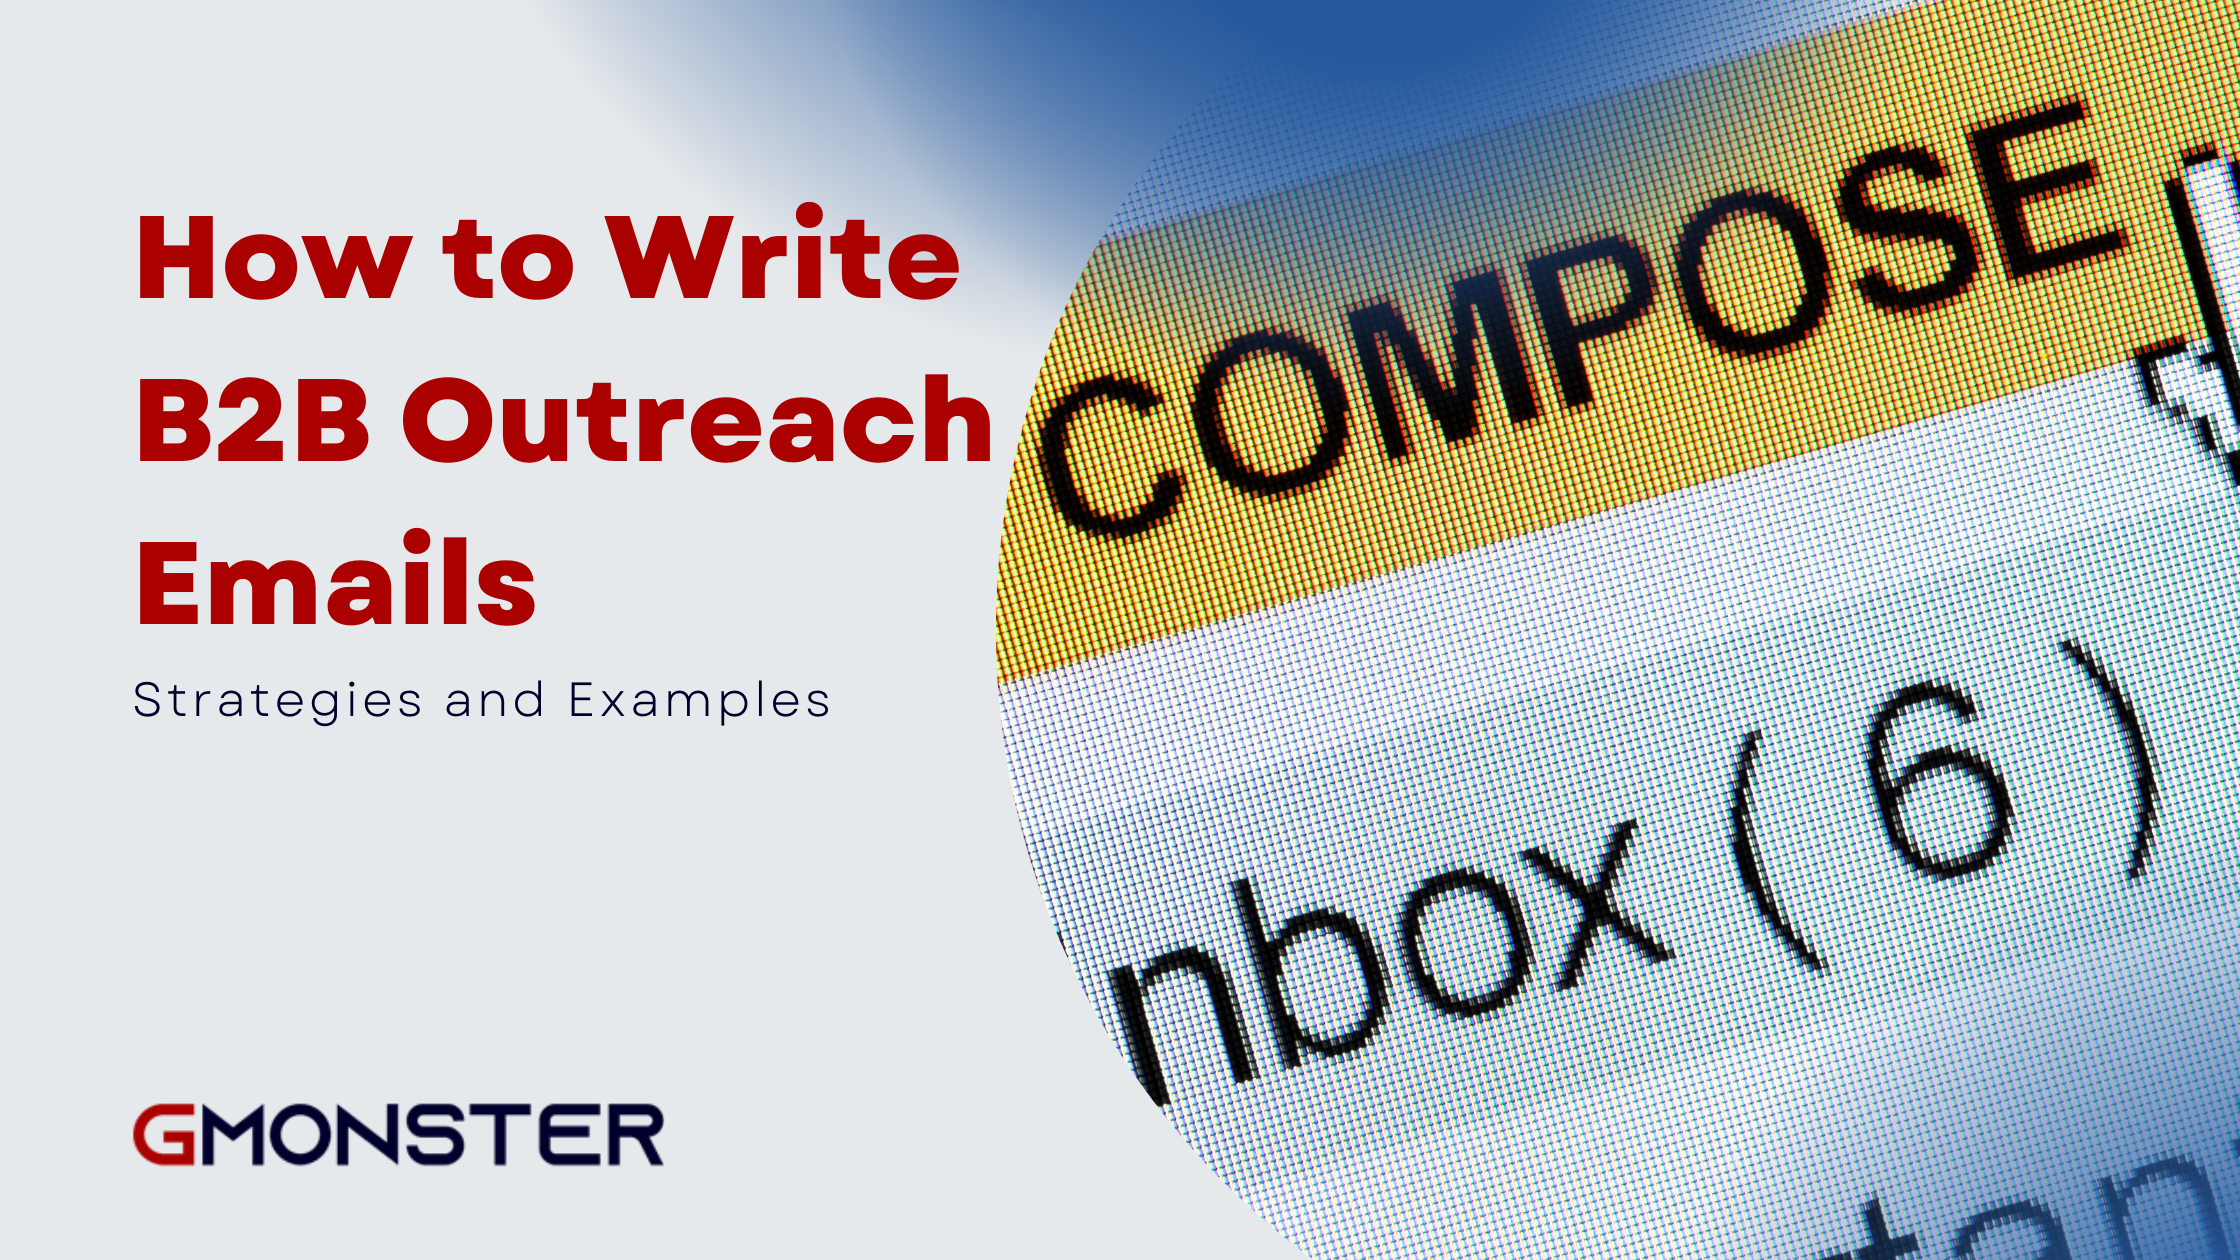 How to Write B2B Outreach Emails: Strategies and Examples